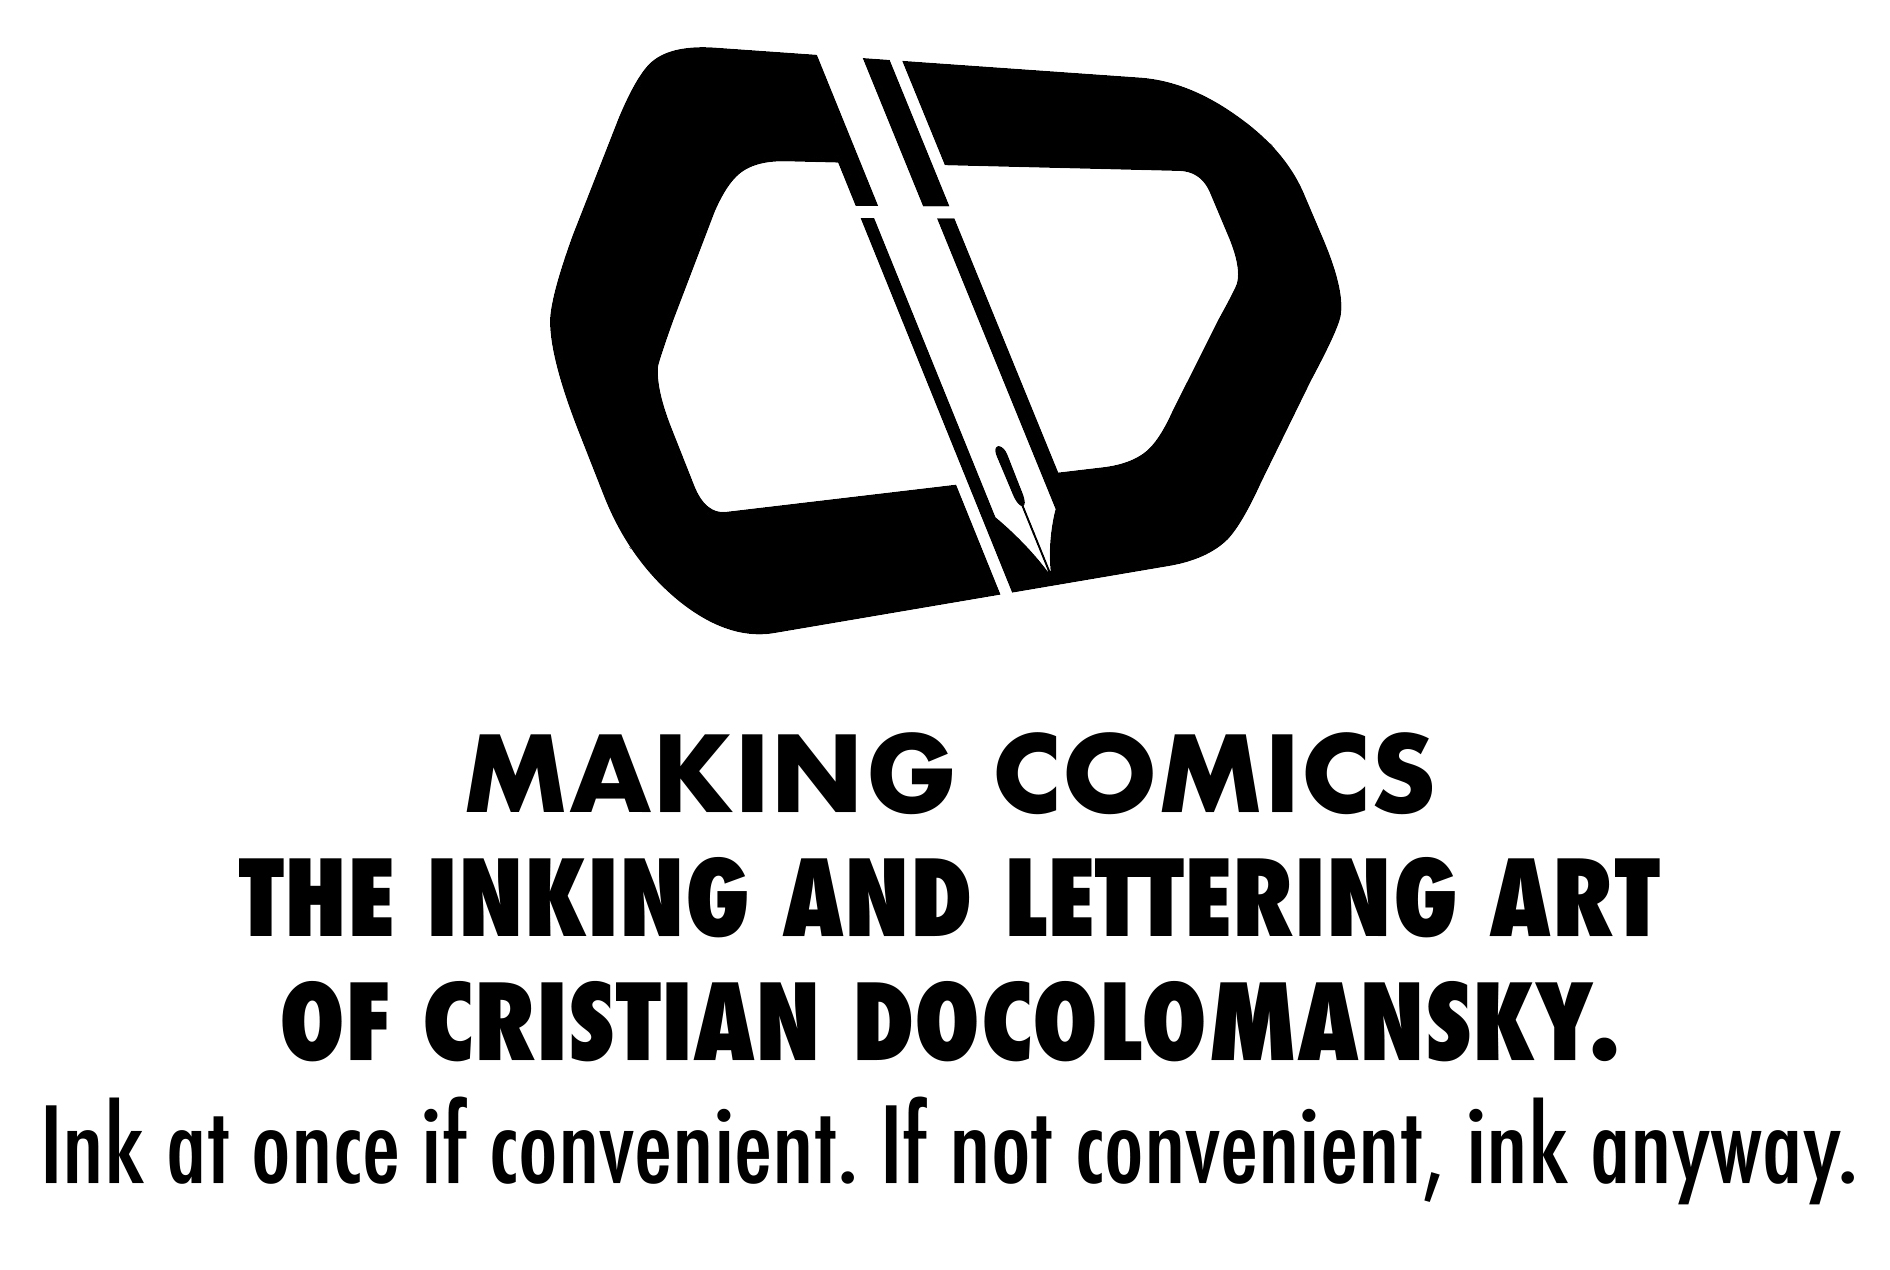 MAKING COMICS – The Inking and Lettering art of Cristian Docolomansky.